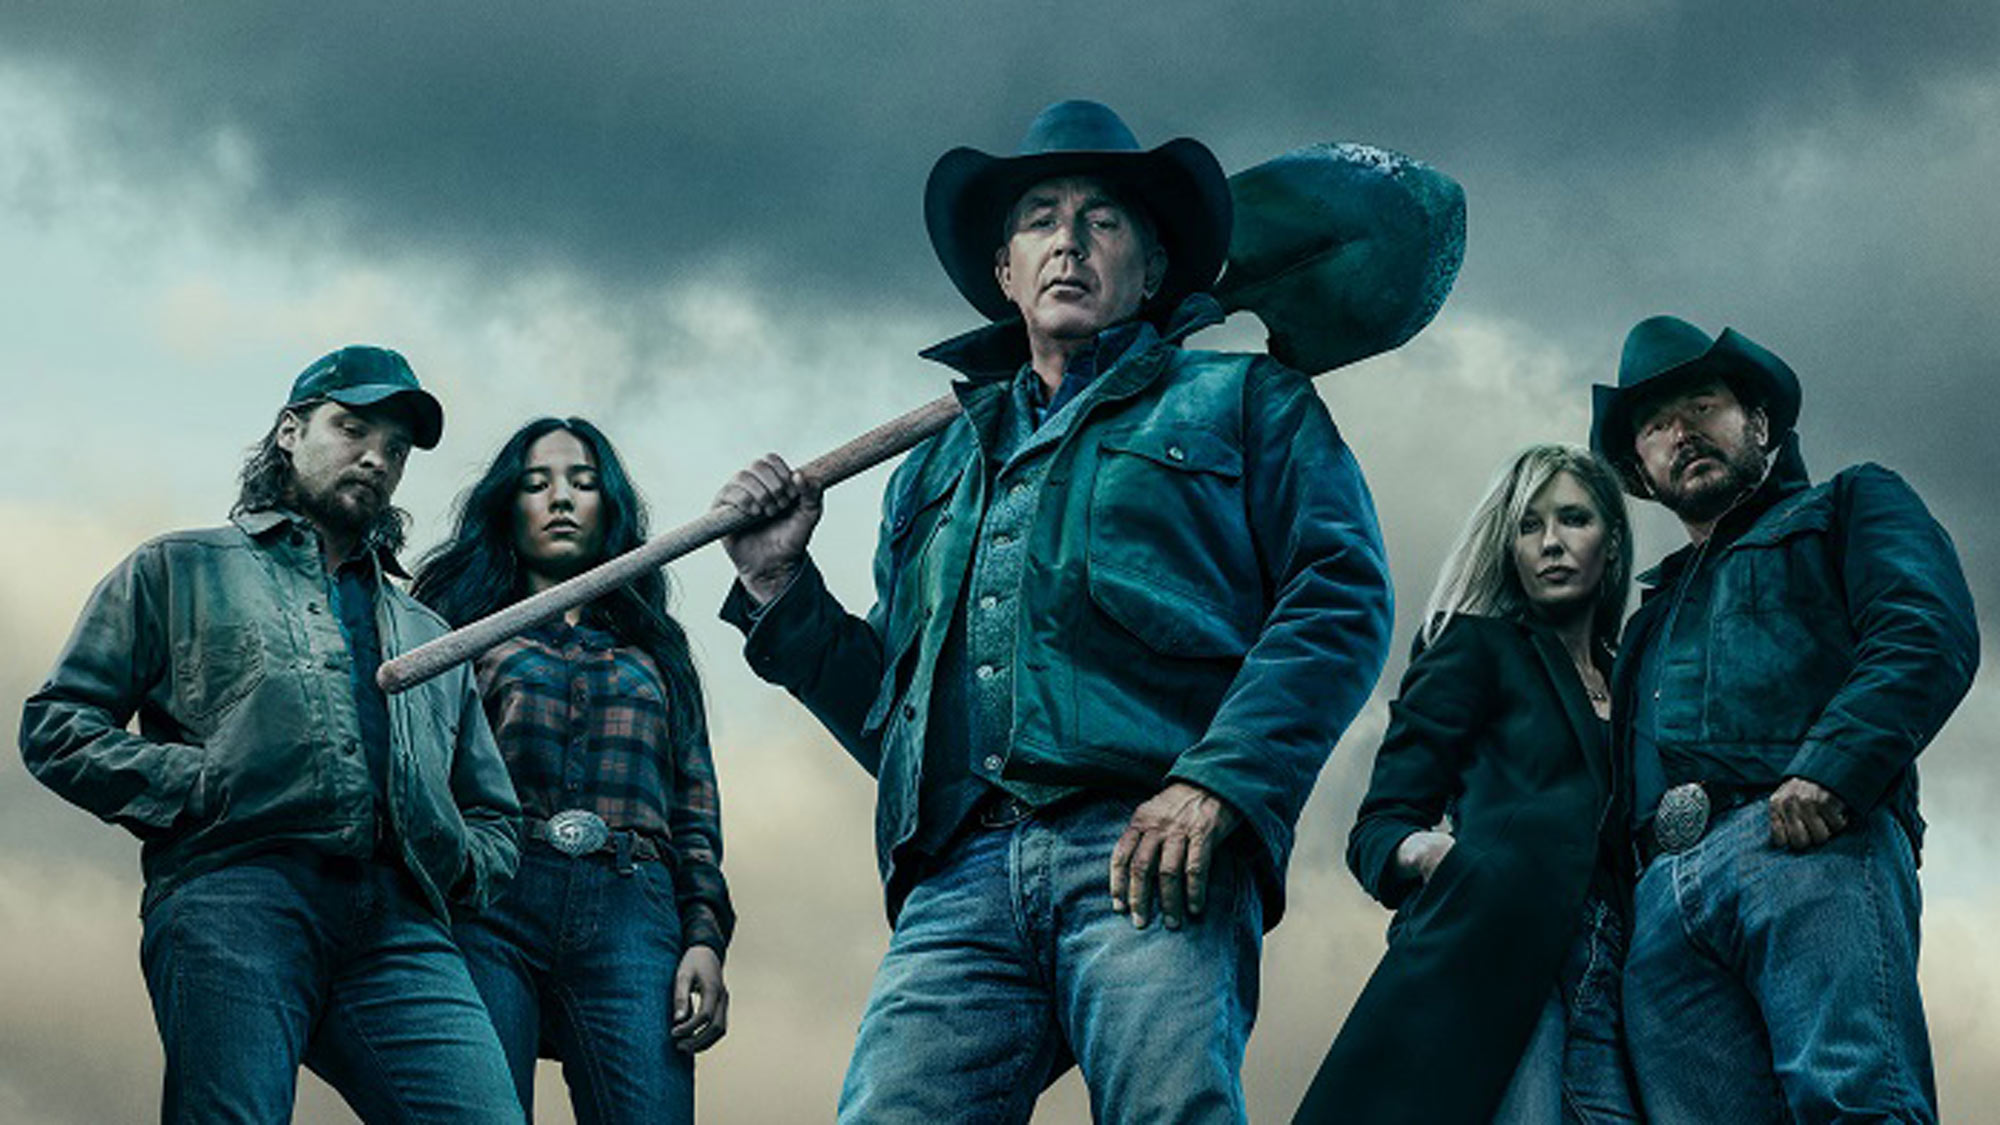 Yellowstone season 4 release date pushed to fall in new teaser trailer